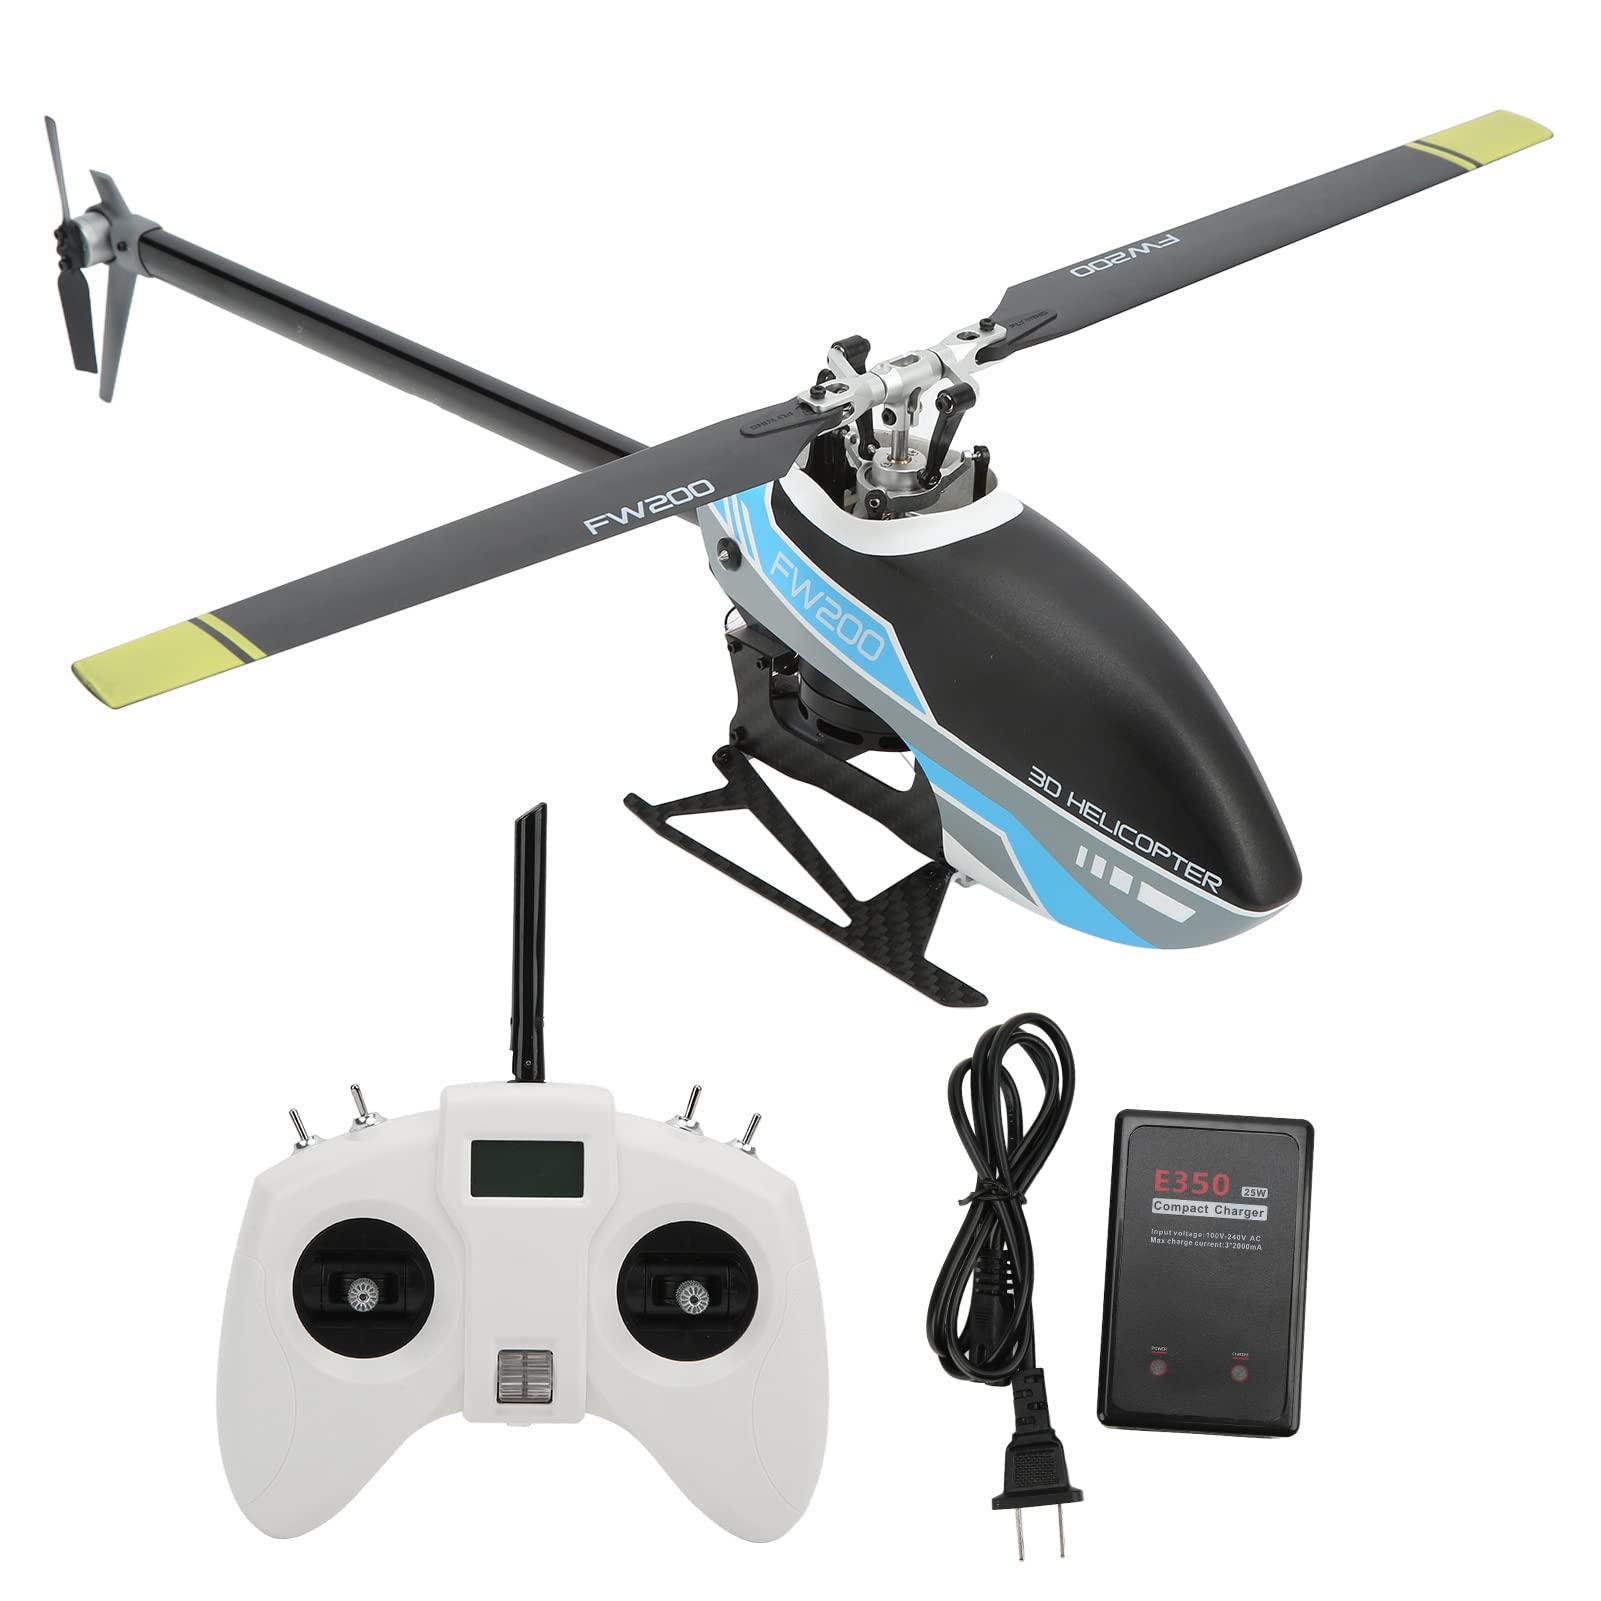 Remote Control Helicopter 200:  `User Experience and Maintenance for Remote Control Helicopter 200